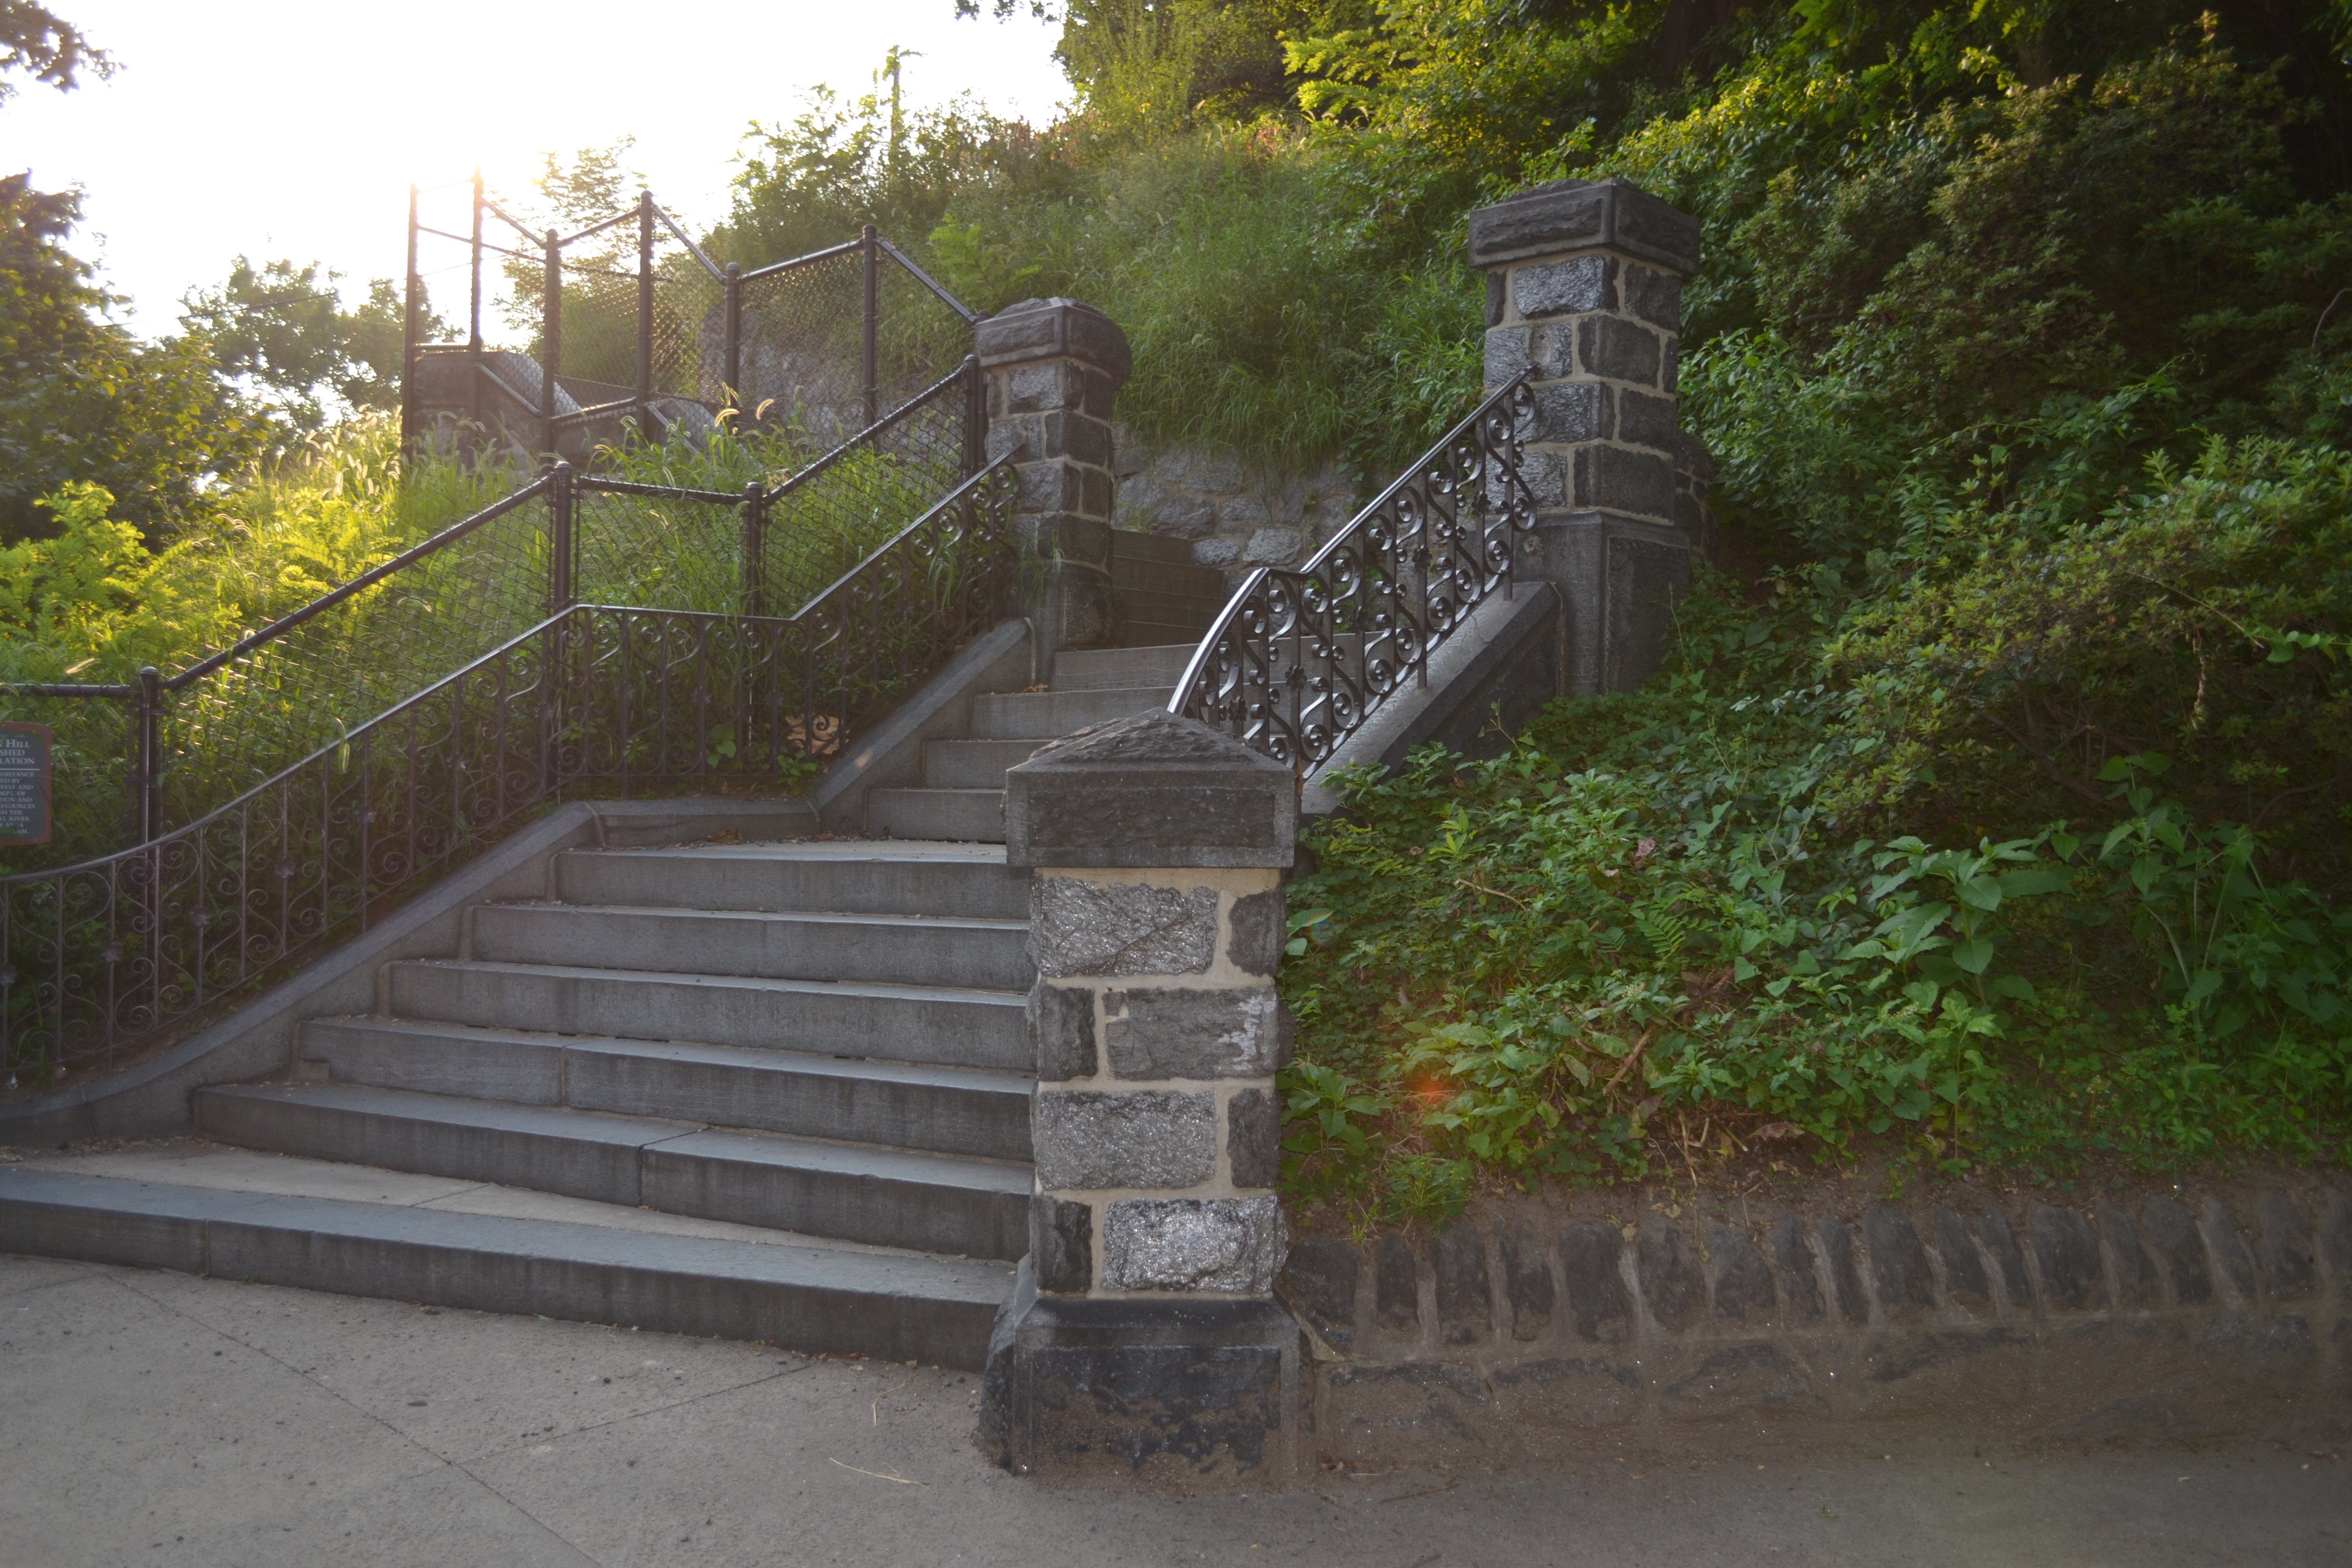 Granite steps lead up to Lemon Hill Mansion and the grassy fields surrounding it